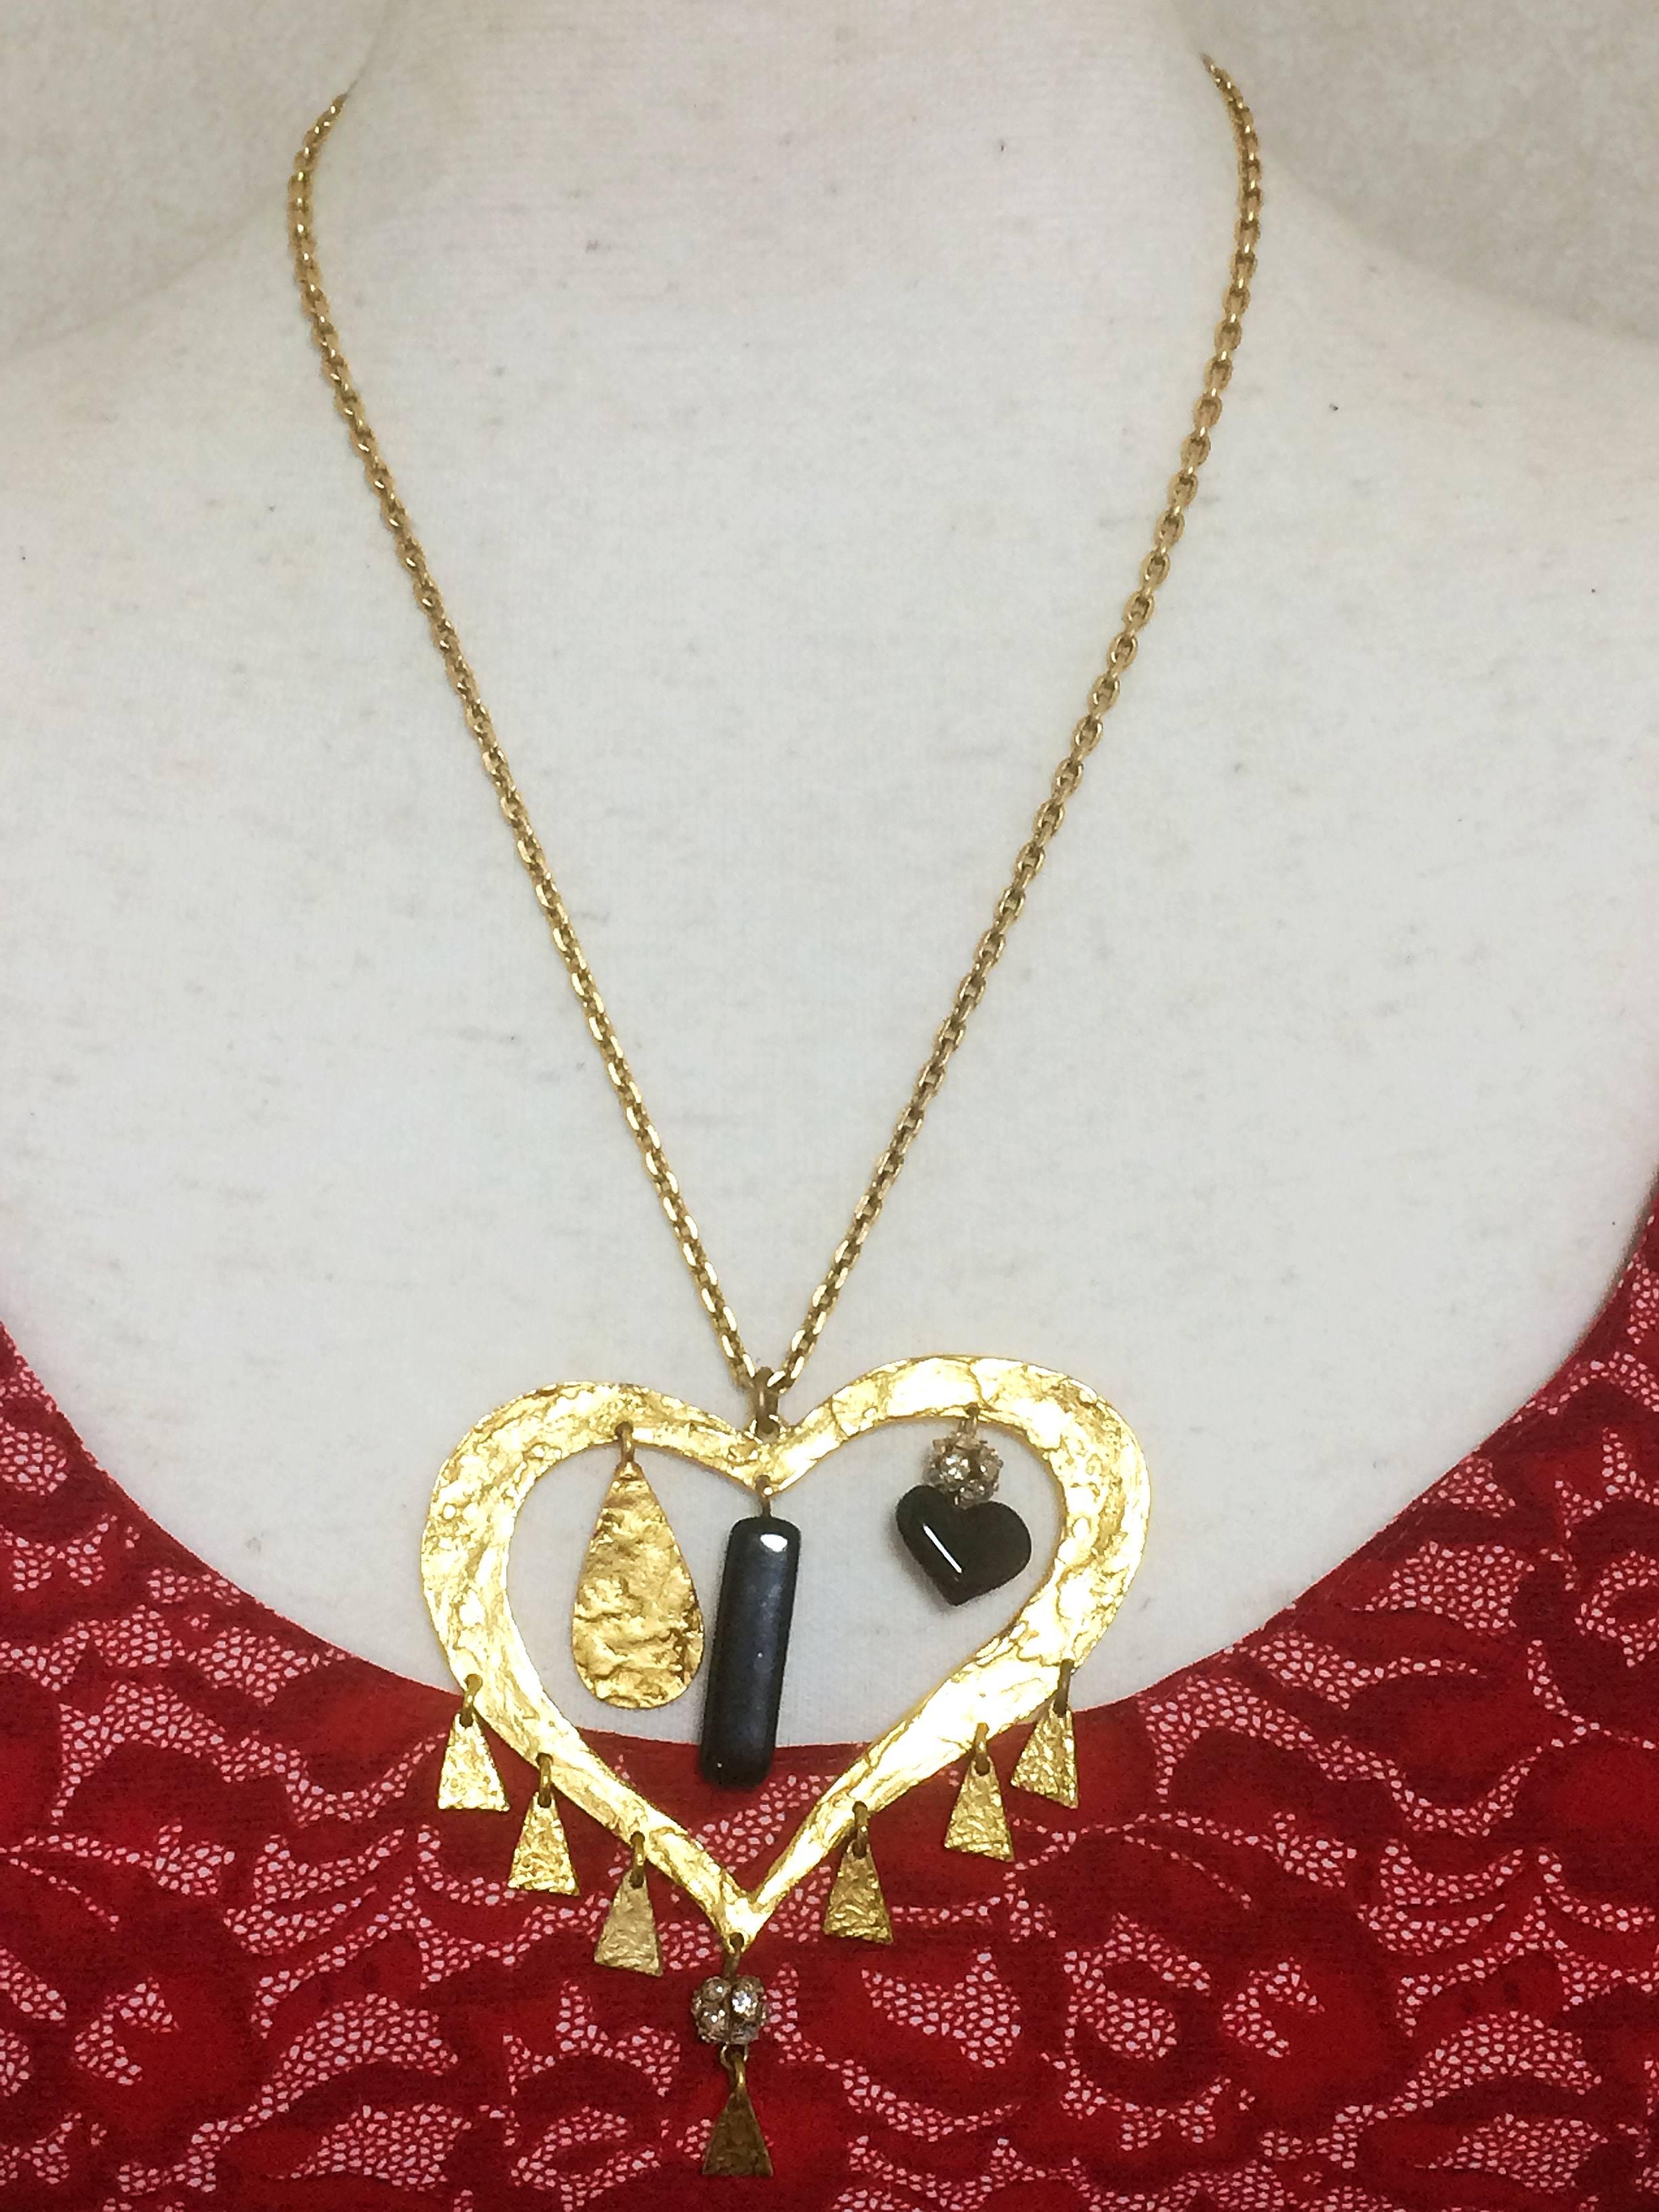 1990s. Vintage Christian Lacroix golden outlined large heart pendant top necklace with dangling charms and crystal stones. Perfect gift jewelry.

Introducing a rare vintage piece from Christian Lacroix from early 90's. 
Gorgeous chain statement